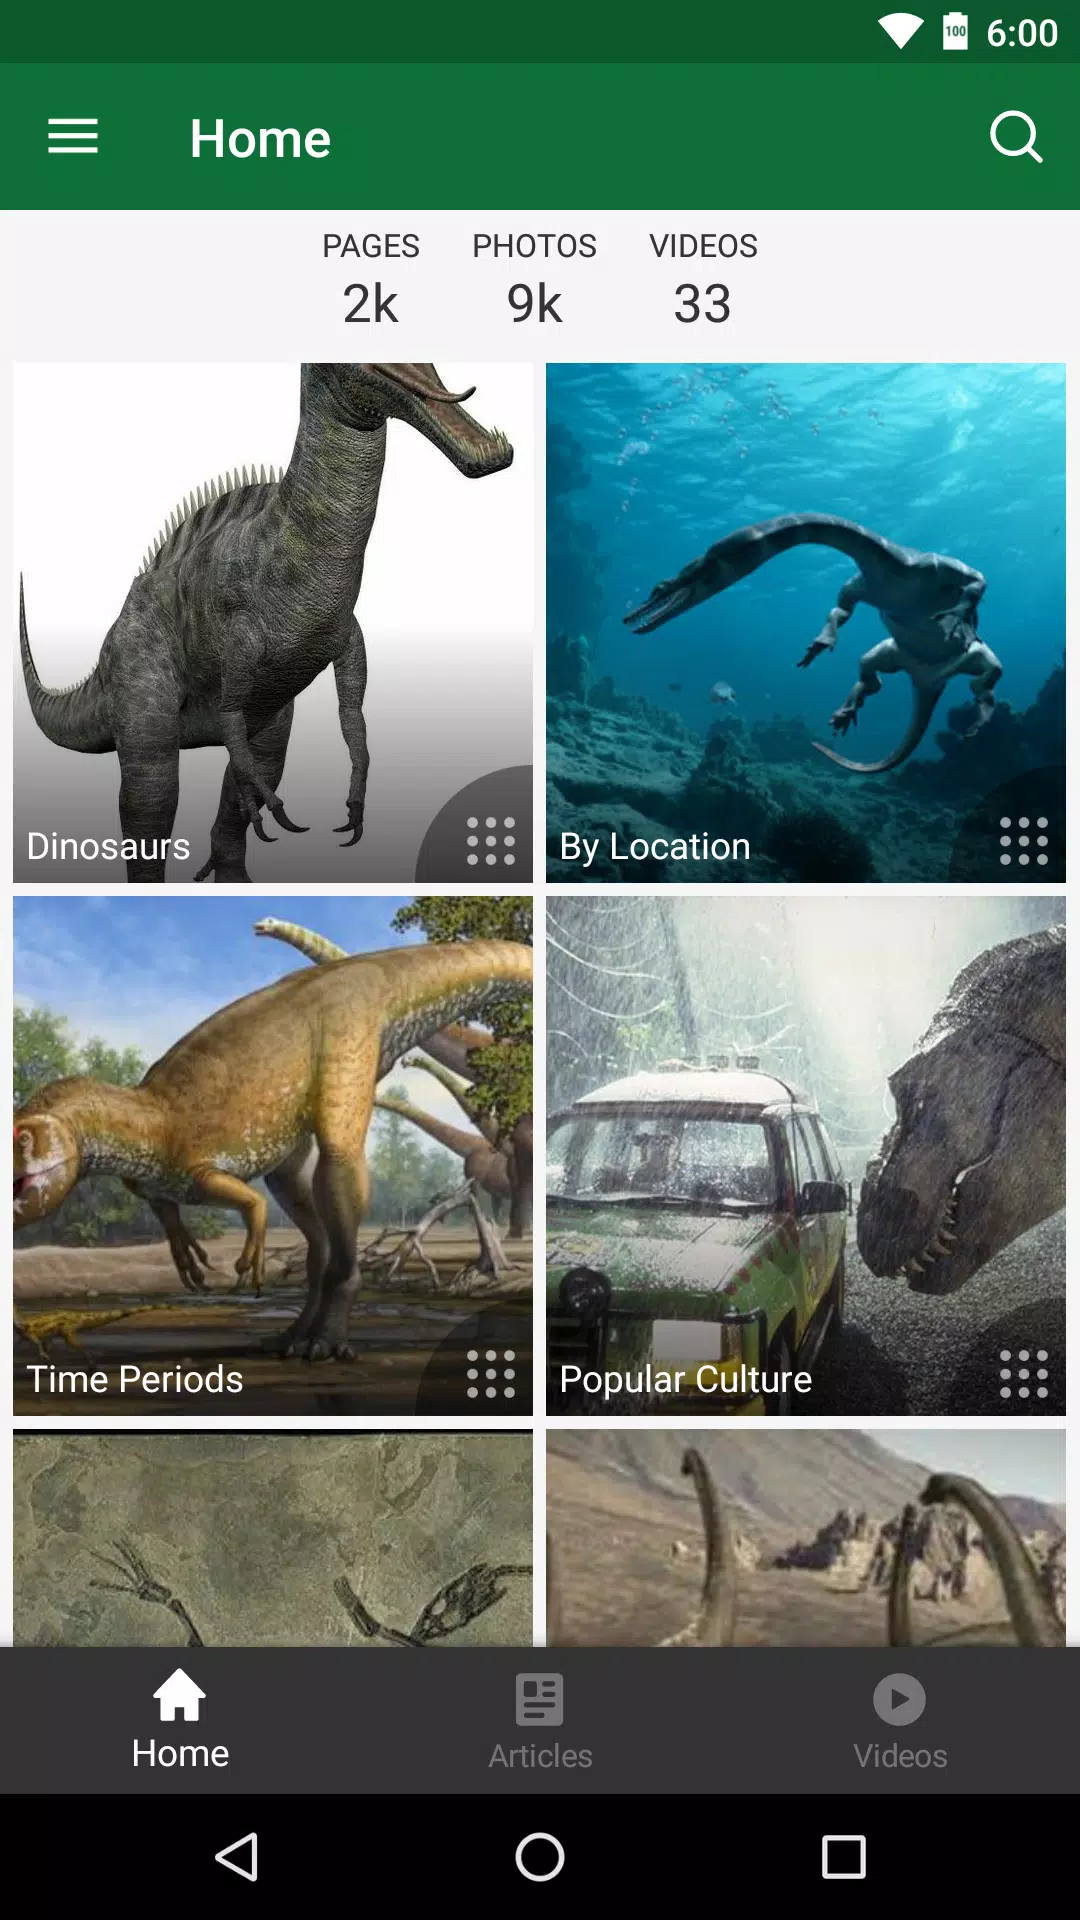 FANDOM for: Dinosaurs for Android - APK Download